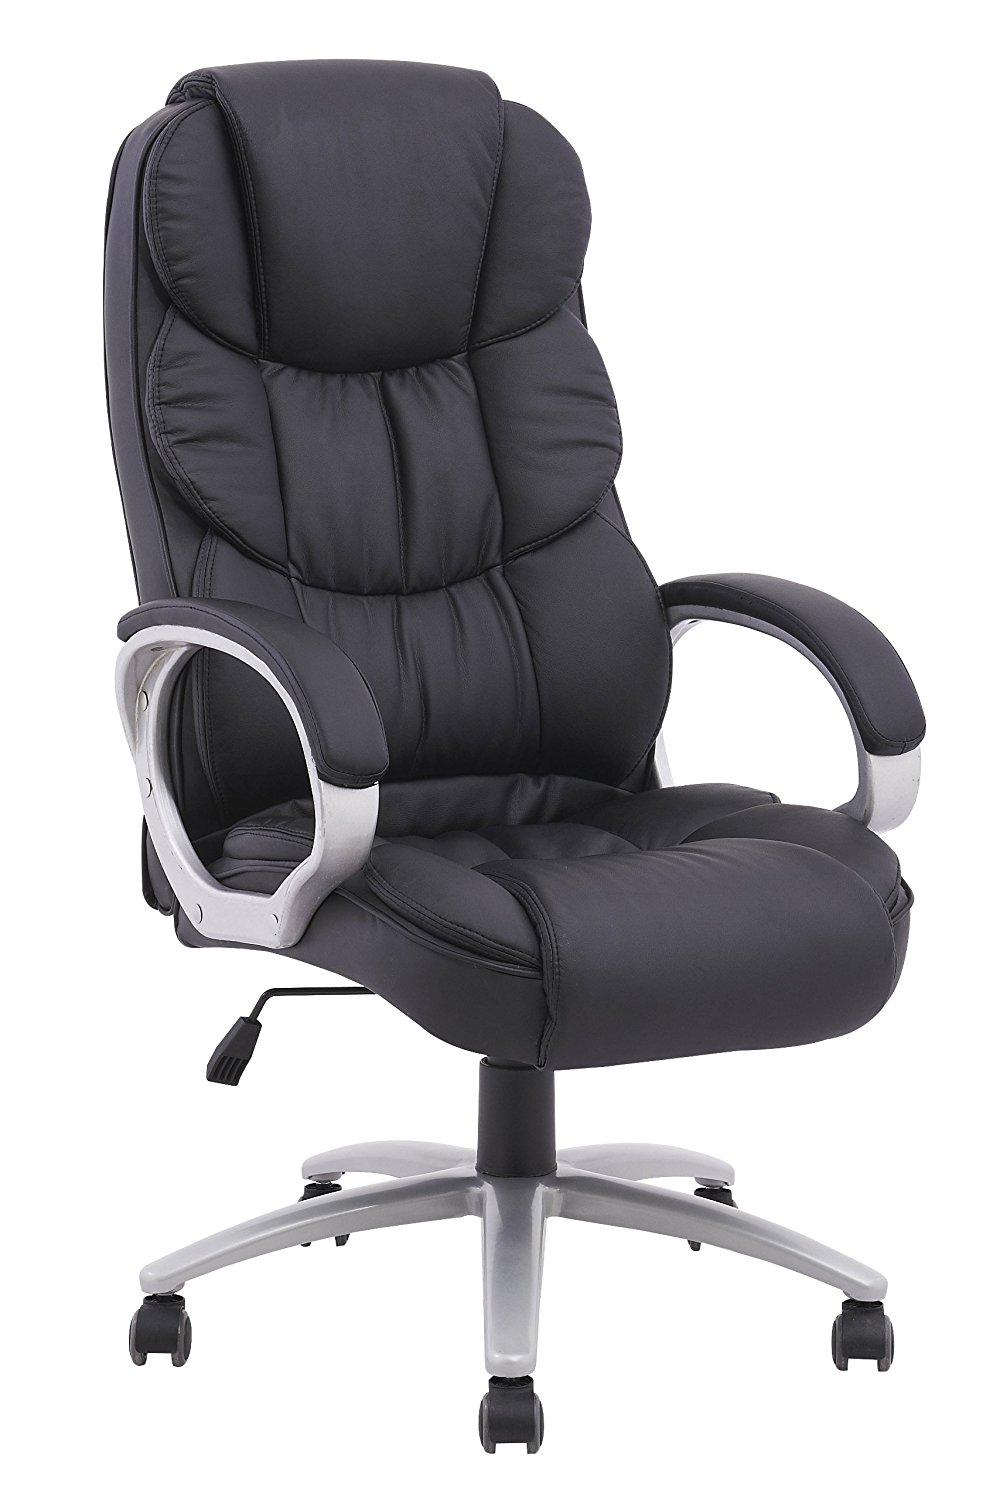 best home office chair 2018